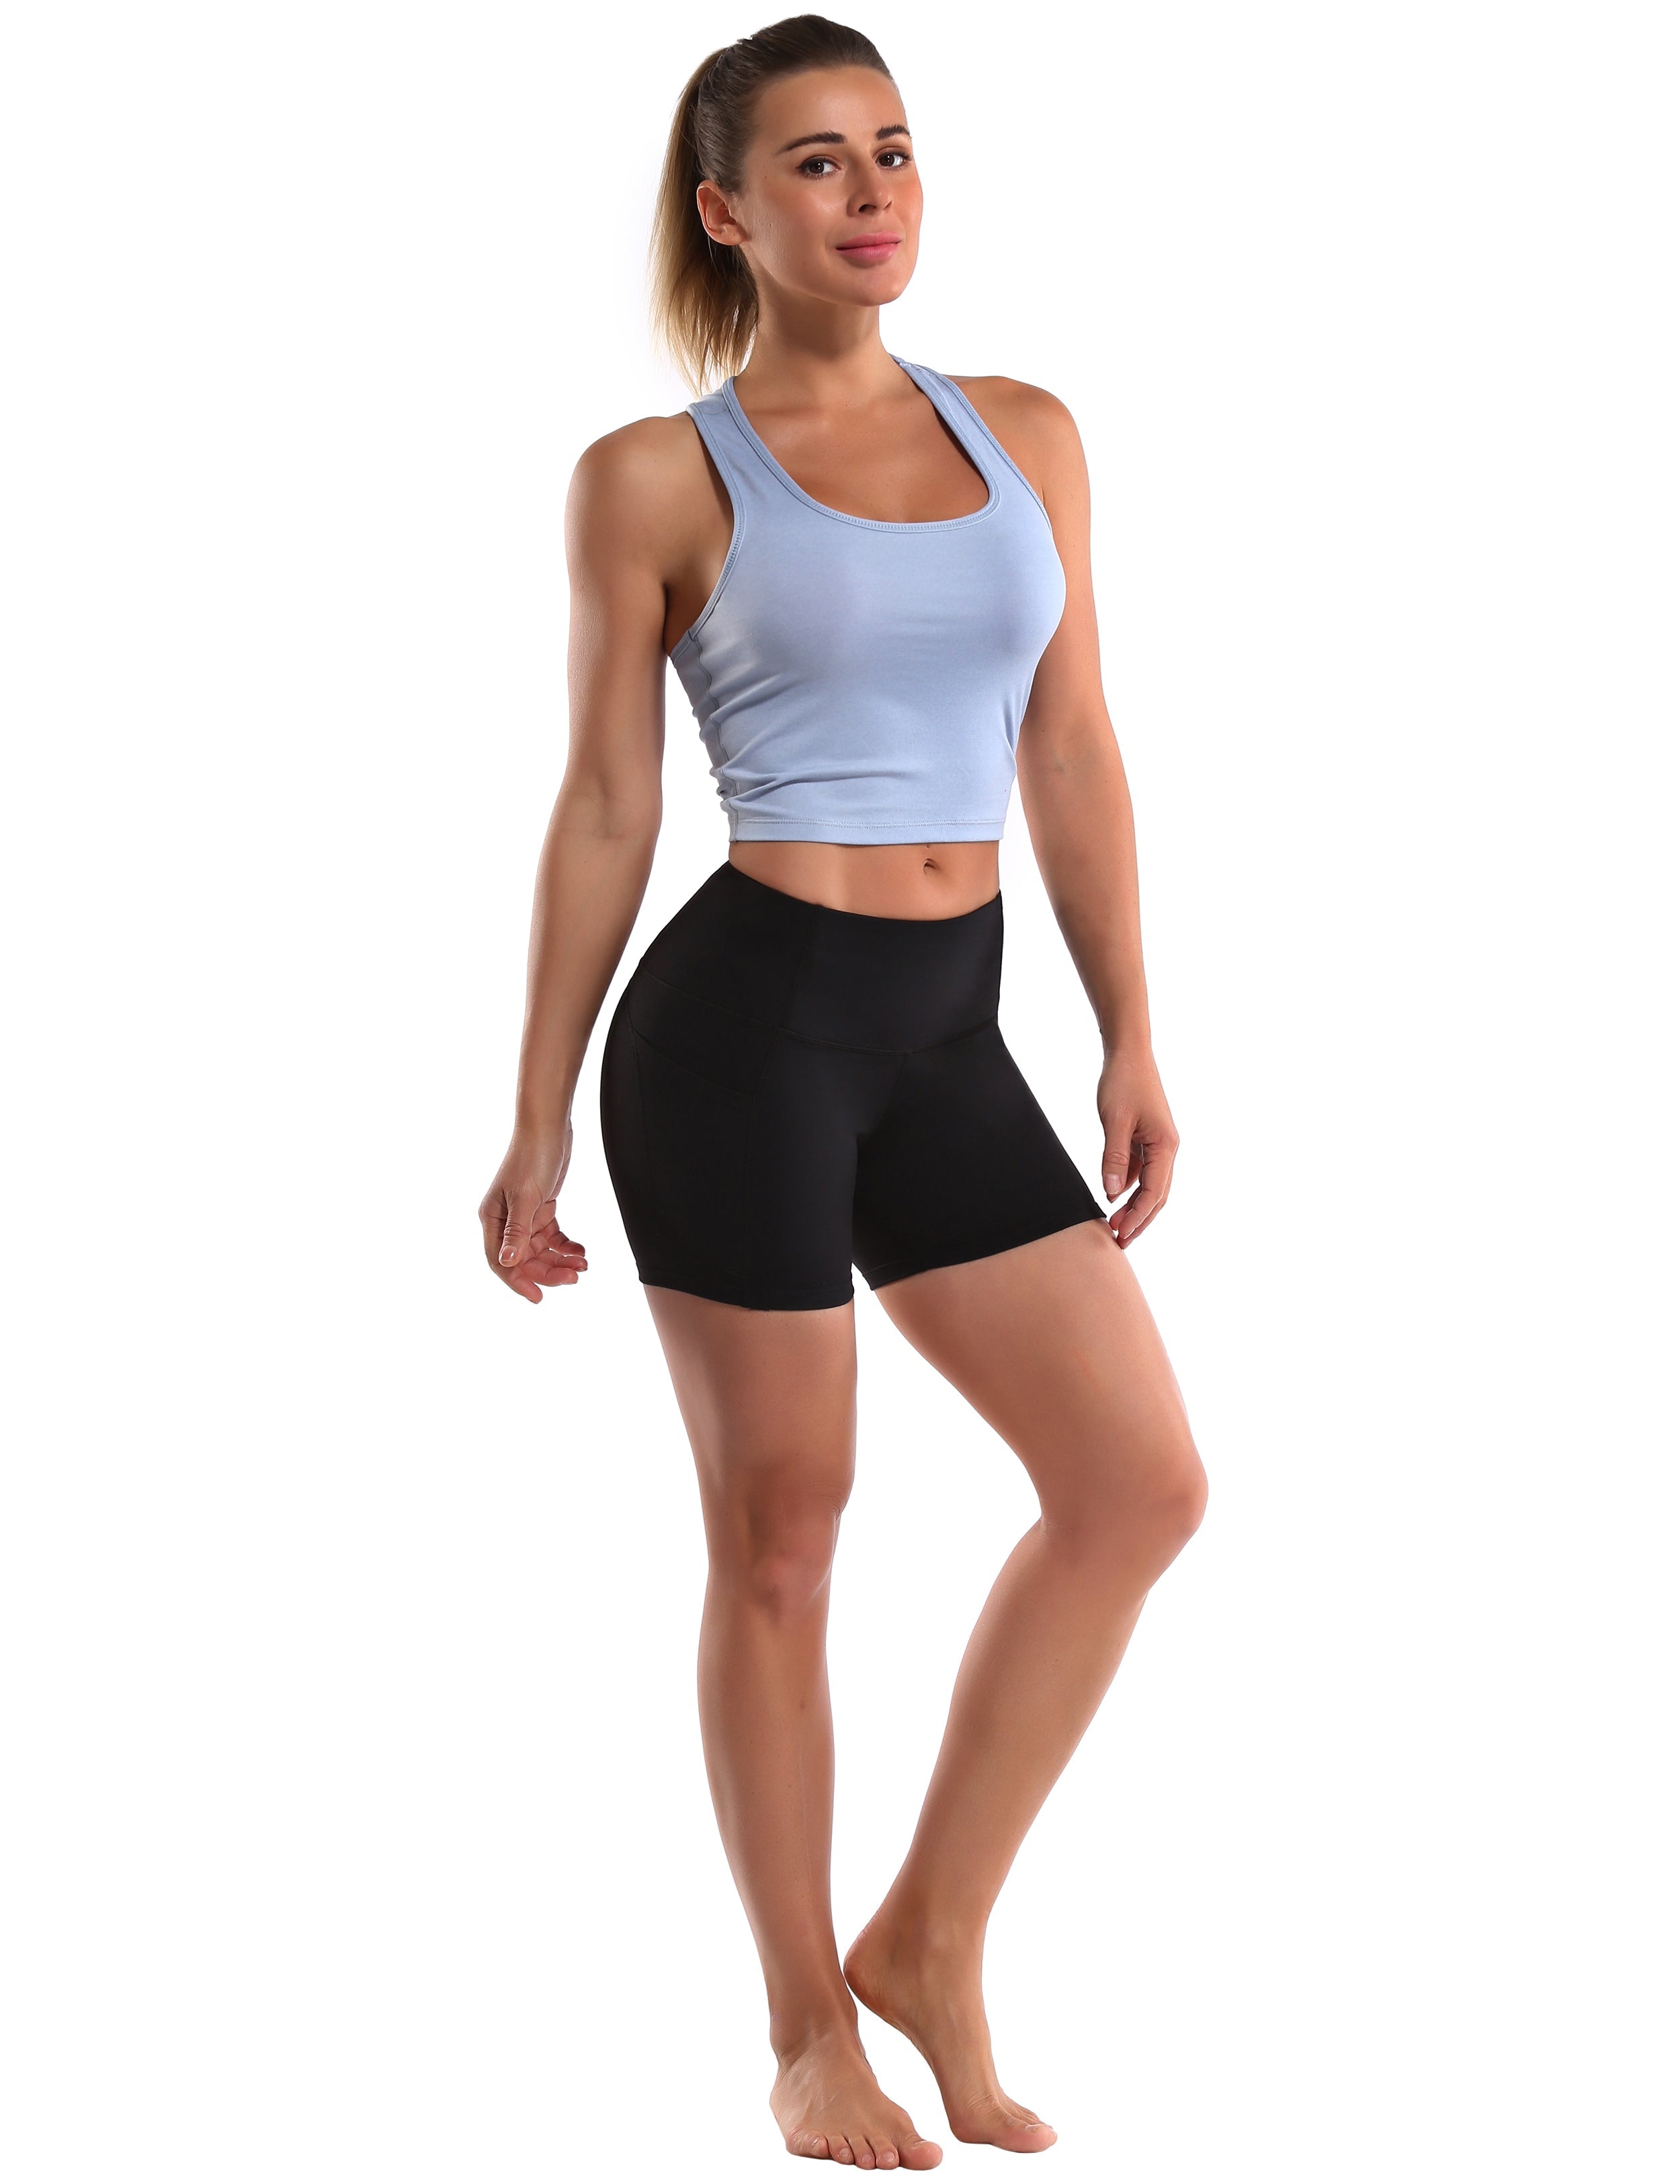 High Waist Side Pockets Pilates Shorts black Softest-ever fabric High elasticity 4-way stretch Fabric doesn't attract lint easily No see-through Moisture-wicking Machine wash 88% Nylon, 12% Spandex